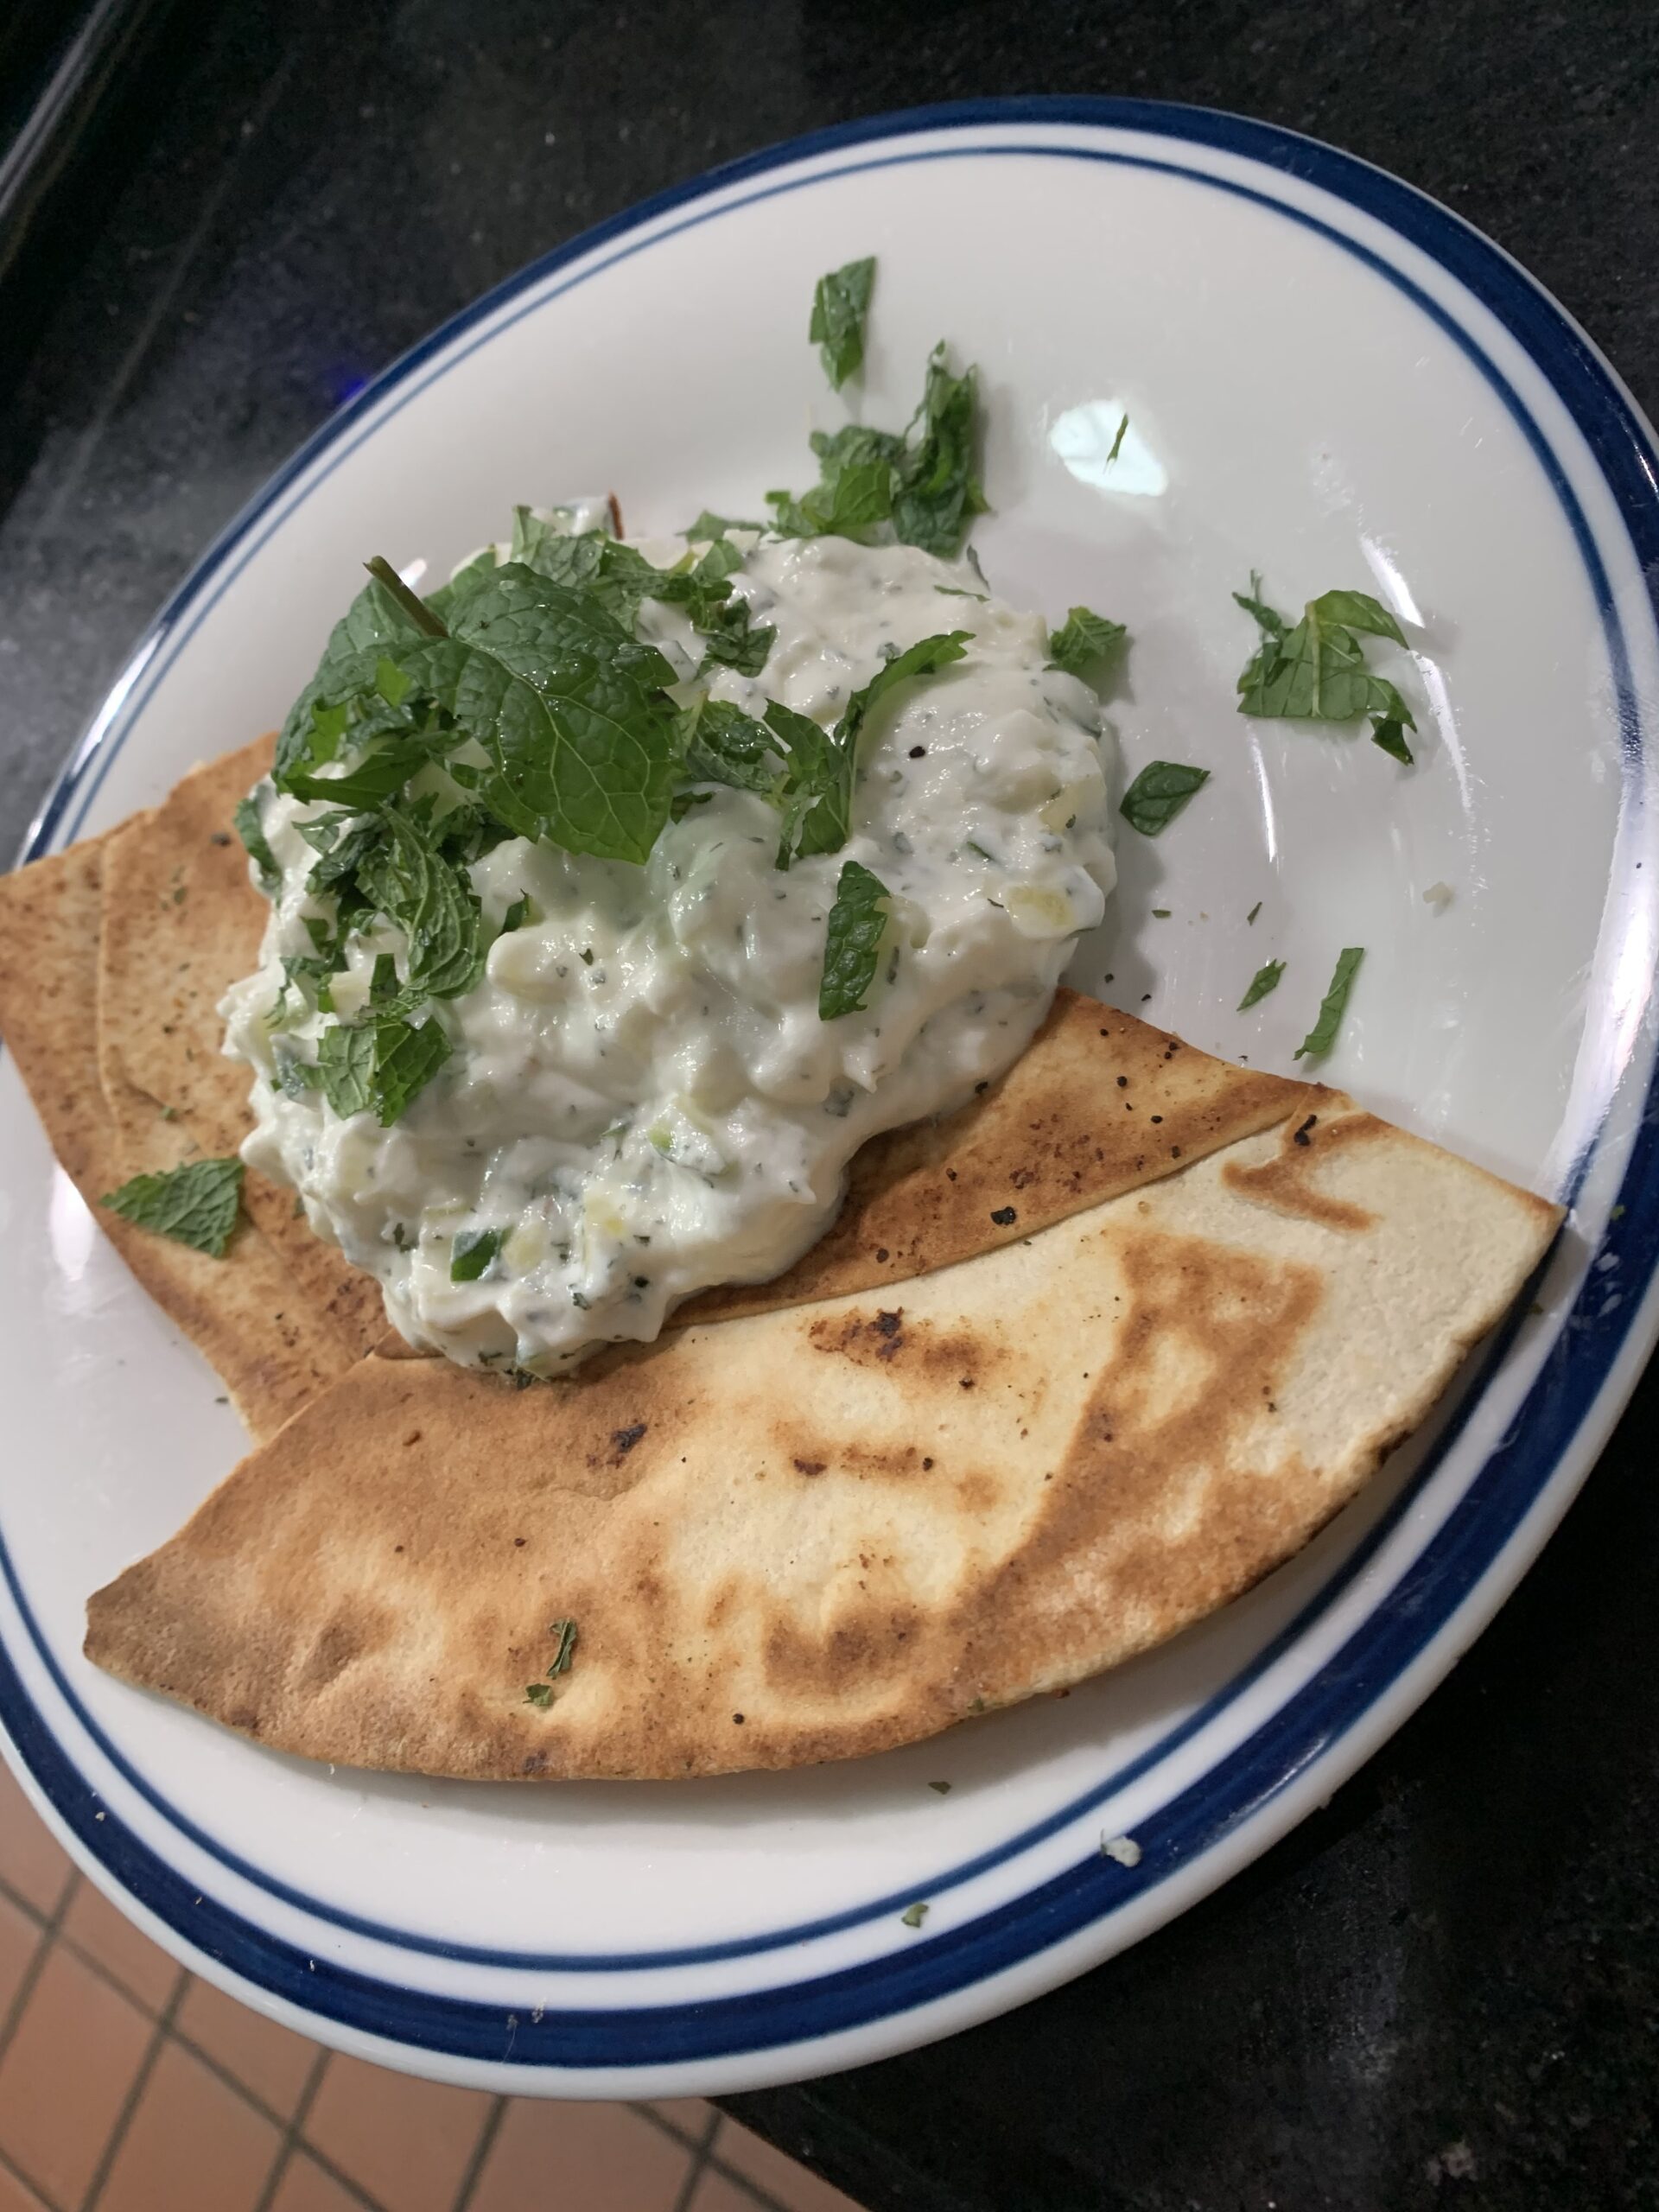 Cucumber Salad - Chopped cucumber tossed with yogurt, dry mint, and pita bread.